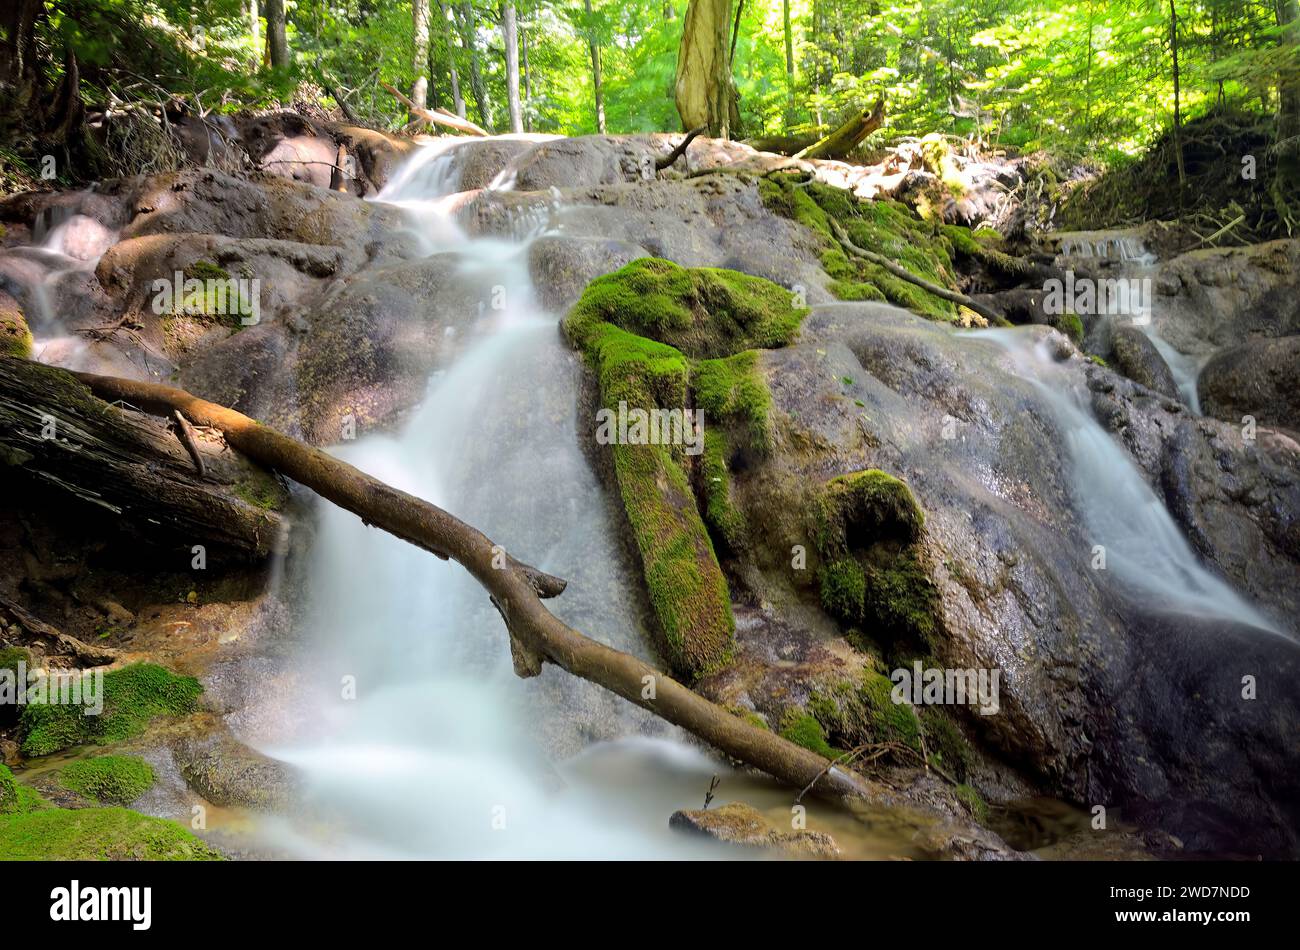 A serene forest oasis with a charming waterfall Stock Photo